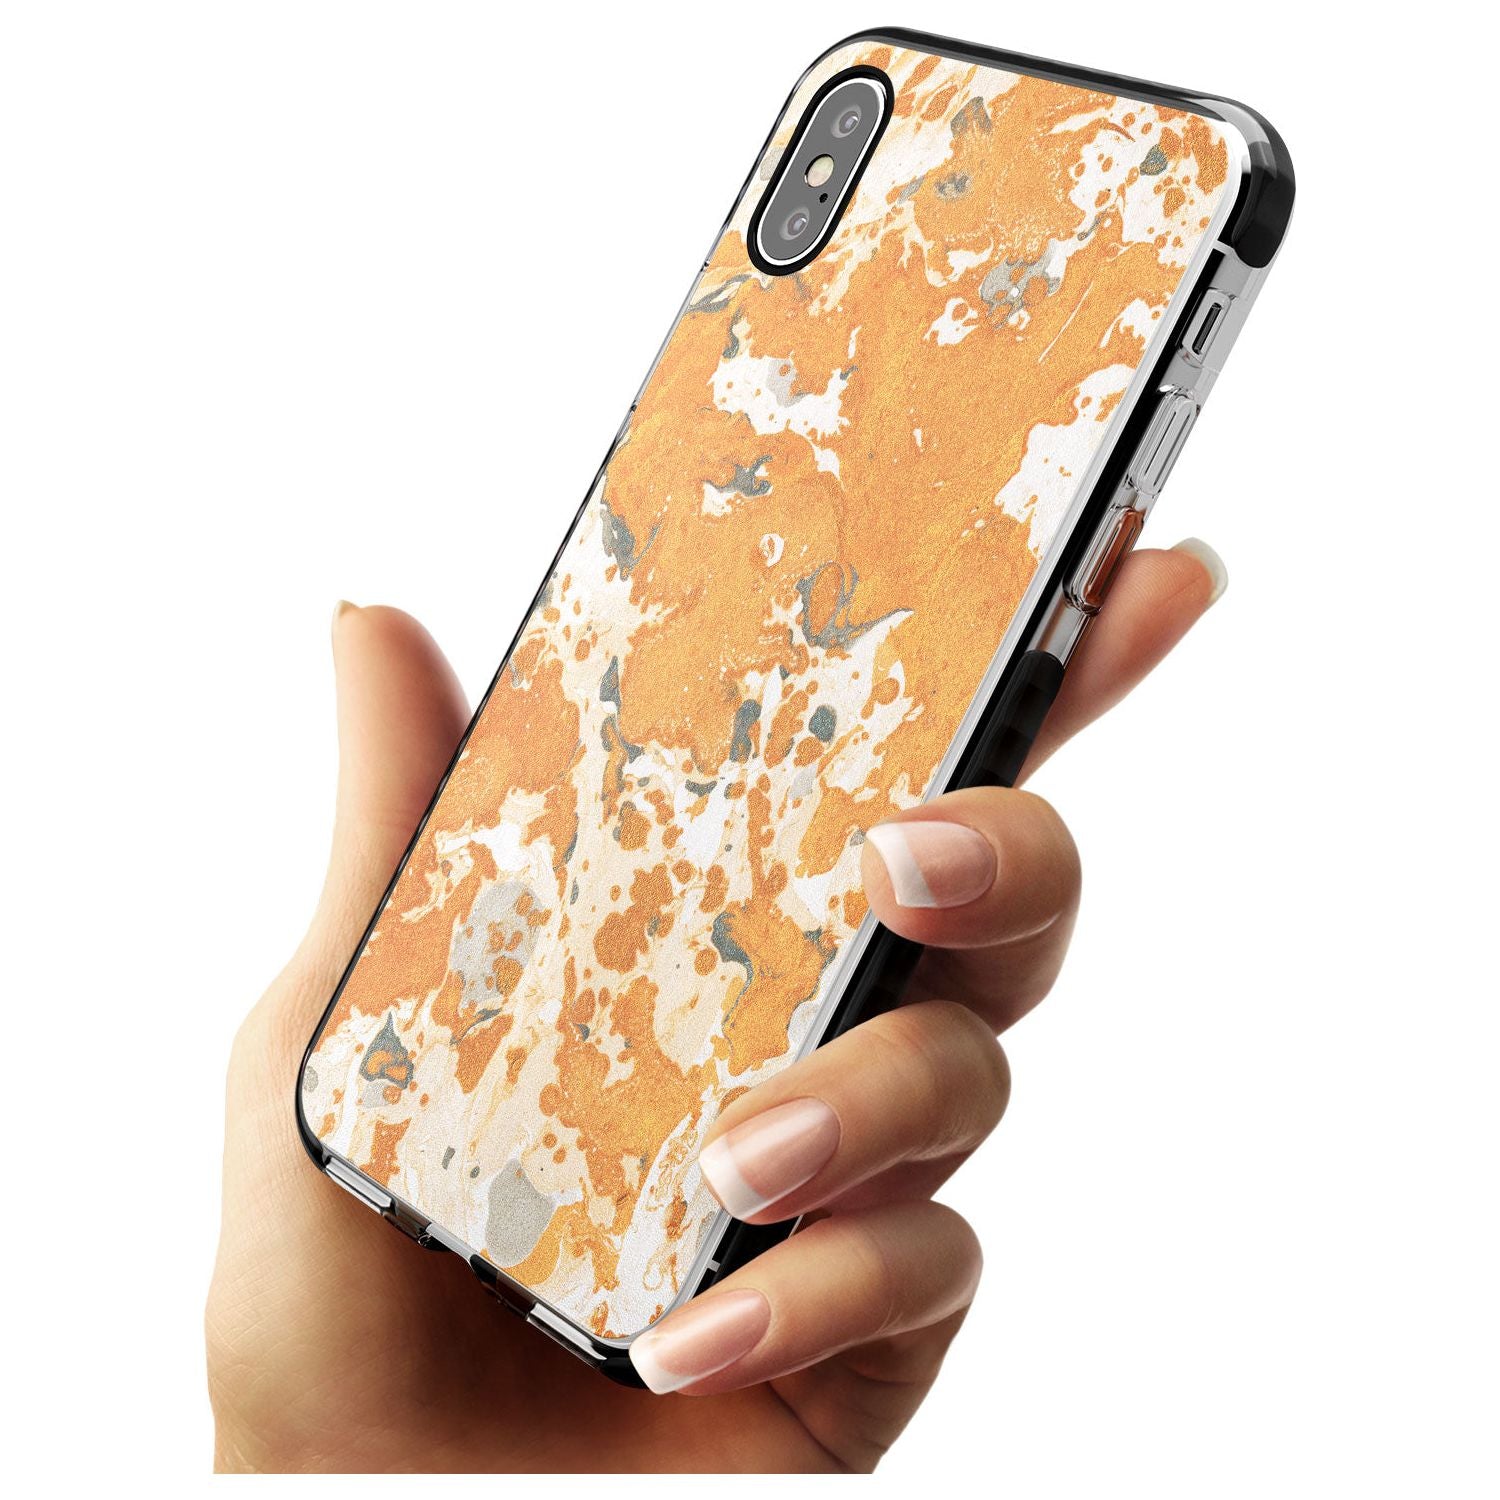 Orange Marbled Paper Pattern Black Impact Phone Case for iPhone X XS Max XR